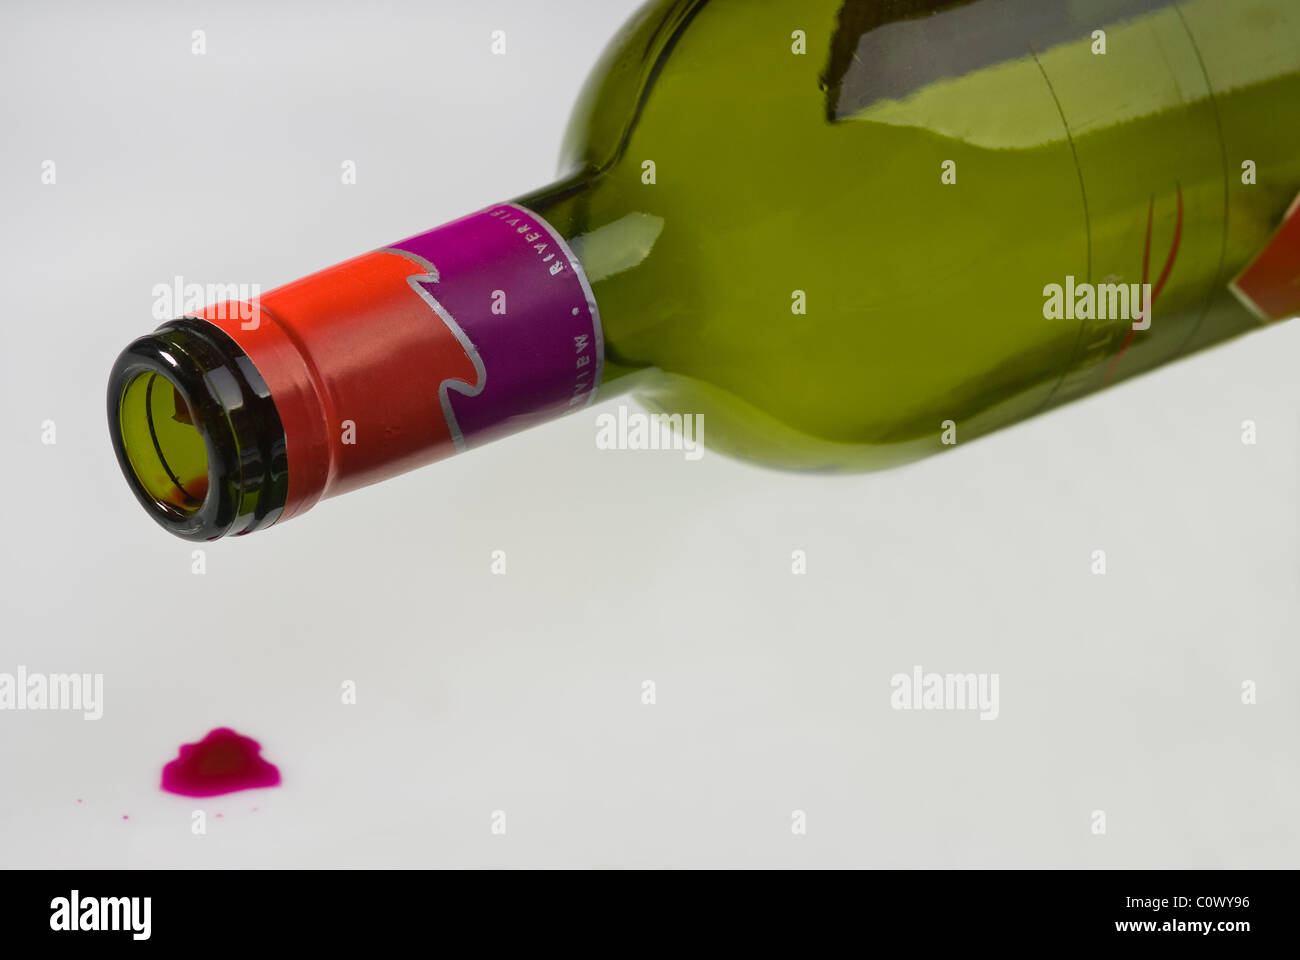 Empty wine bottle lying on it's side, a drip of red wine on the floor. Stock Photo